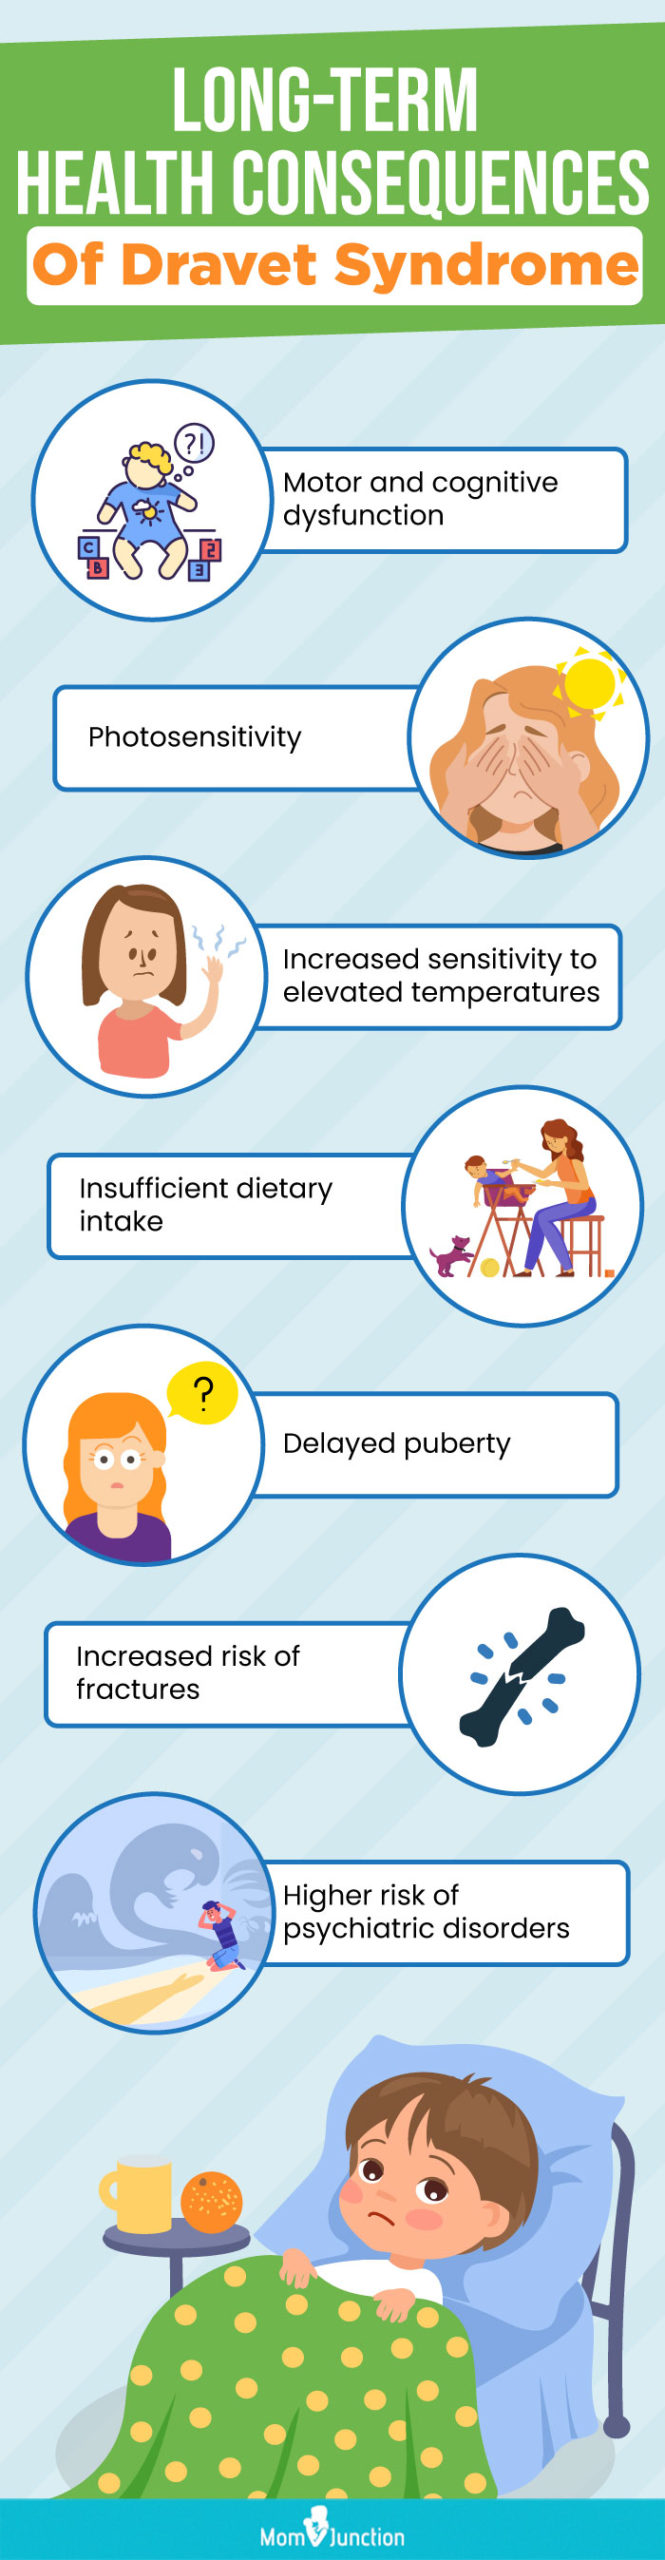 long term health consequences of dravet syndrome (infographic)